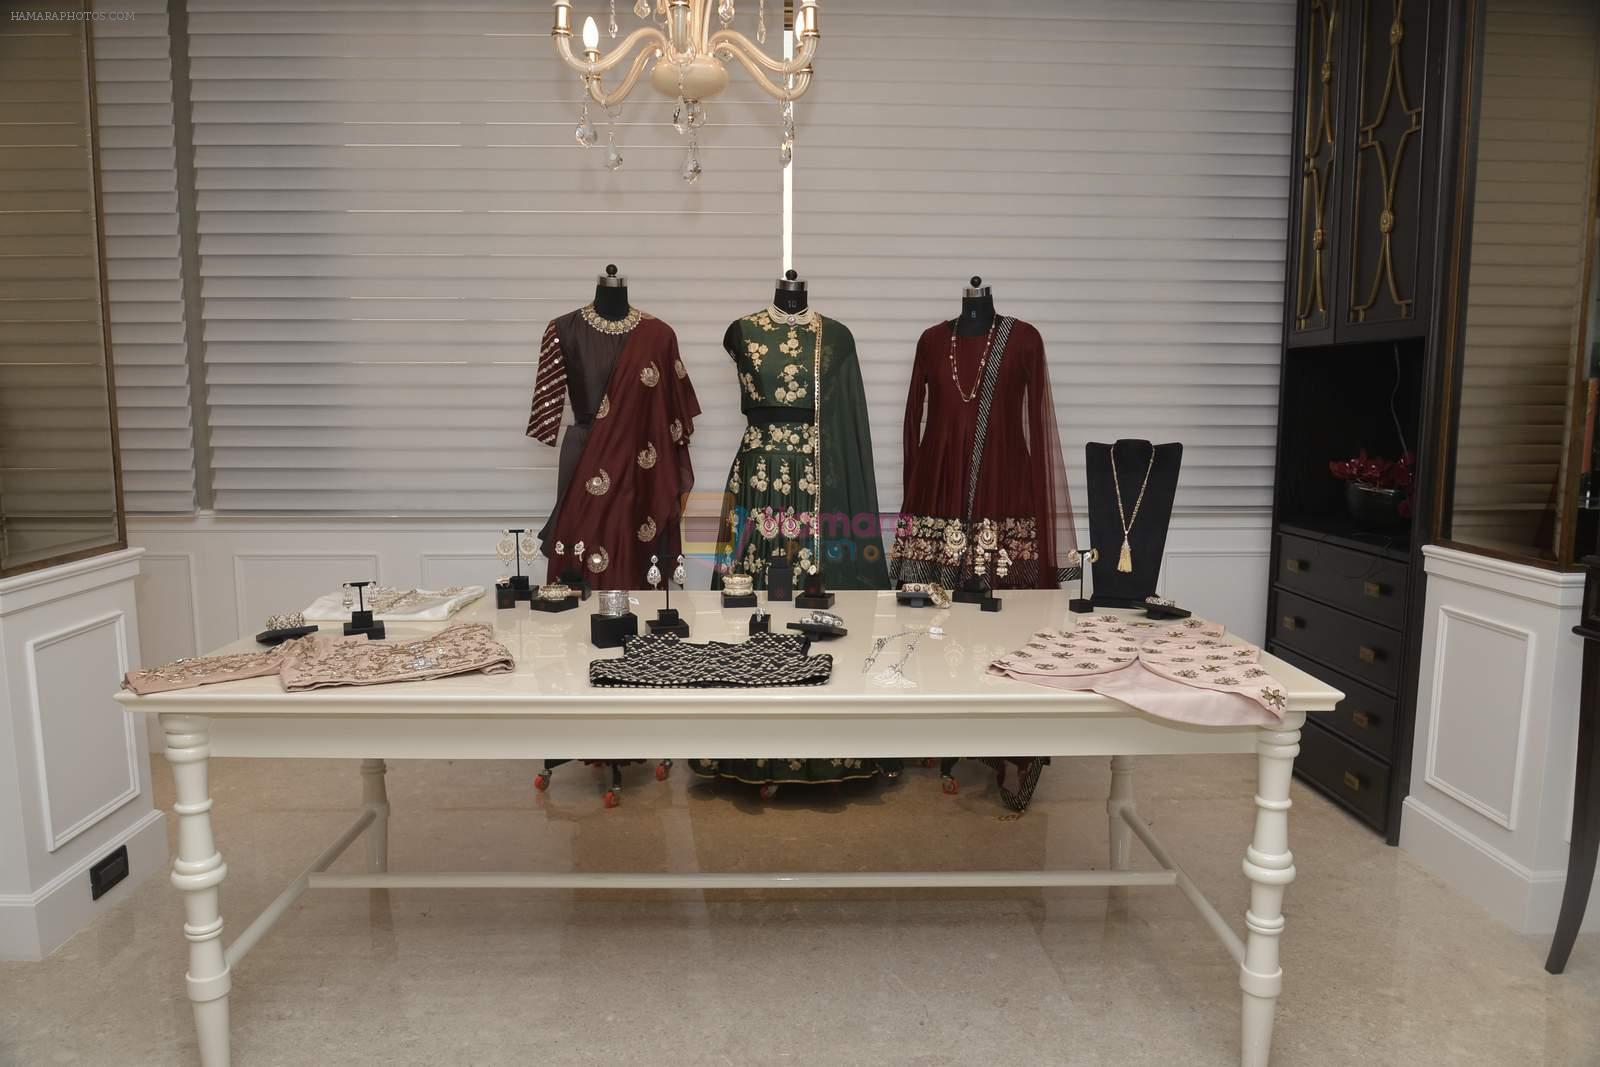 at Payal Singhal and Moksh Jewellery preview on 17th Dec 2015